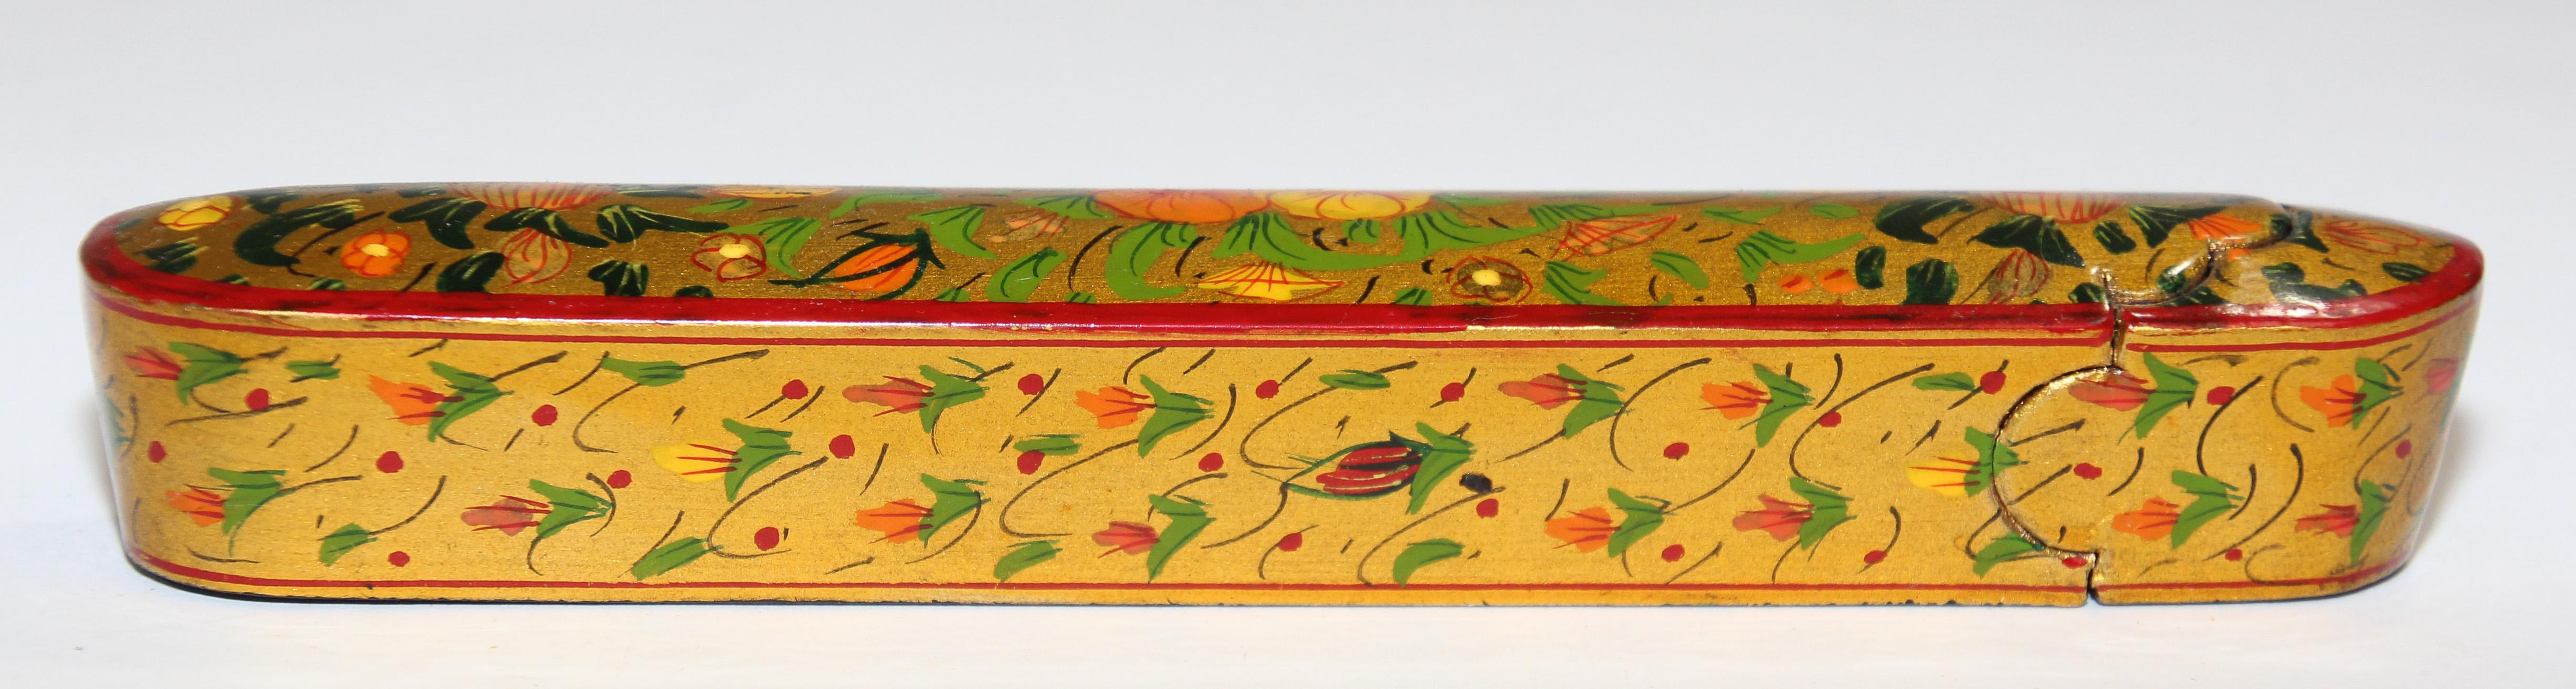 20th Century Persian Lacquer Pen Box Hand Painted with Floral and Gilt Design For Sale